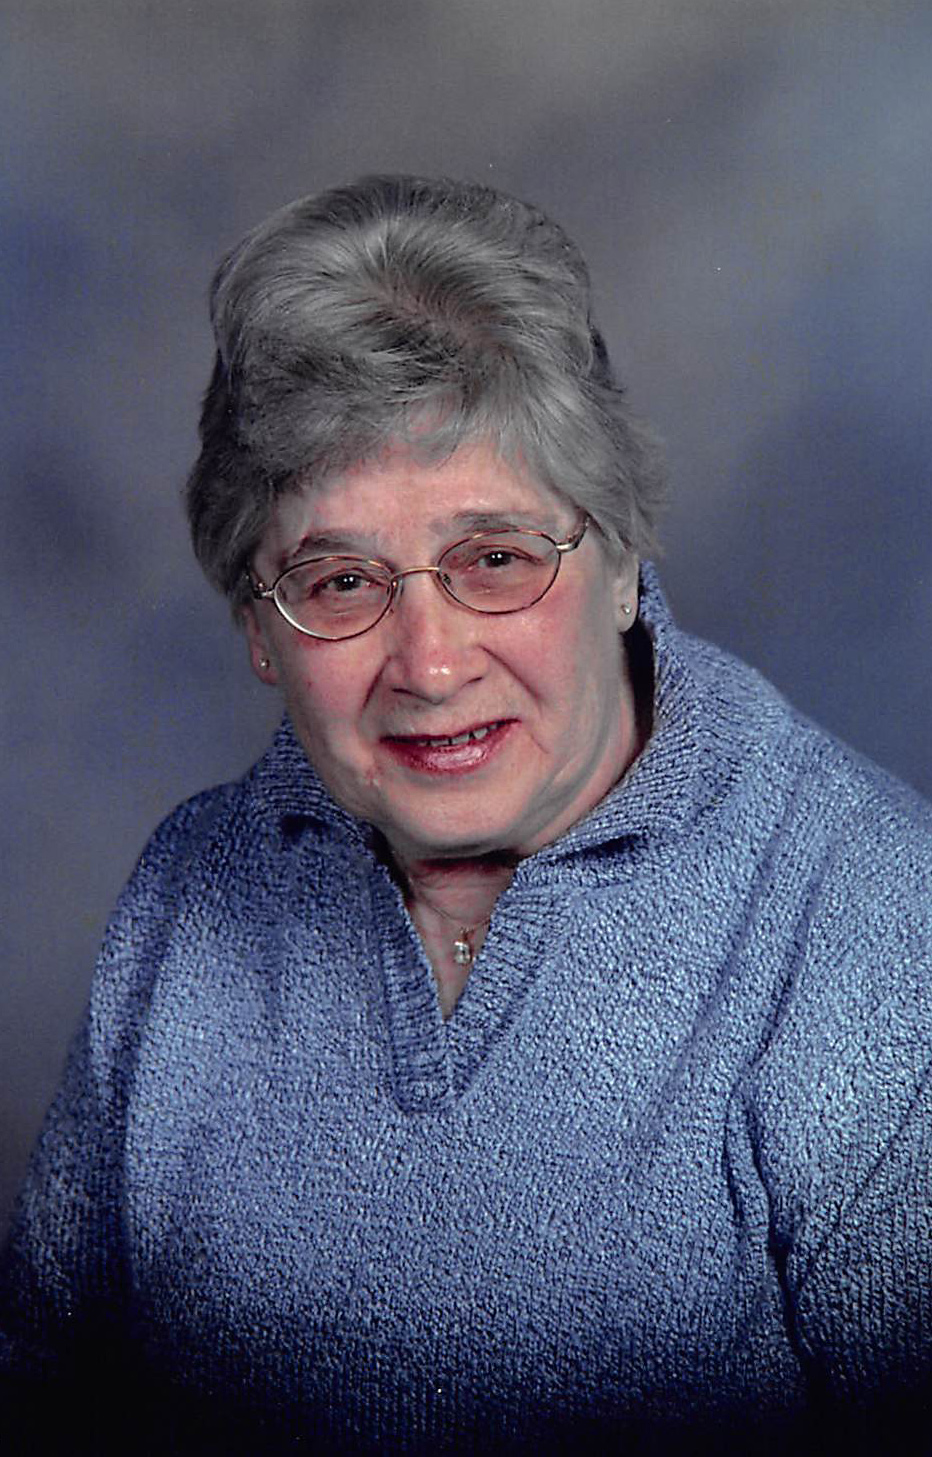 Carney Janet Obit Pic Cropped